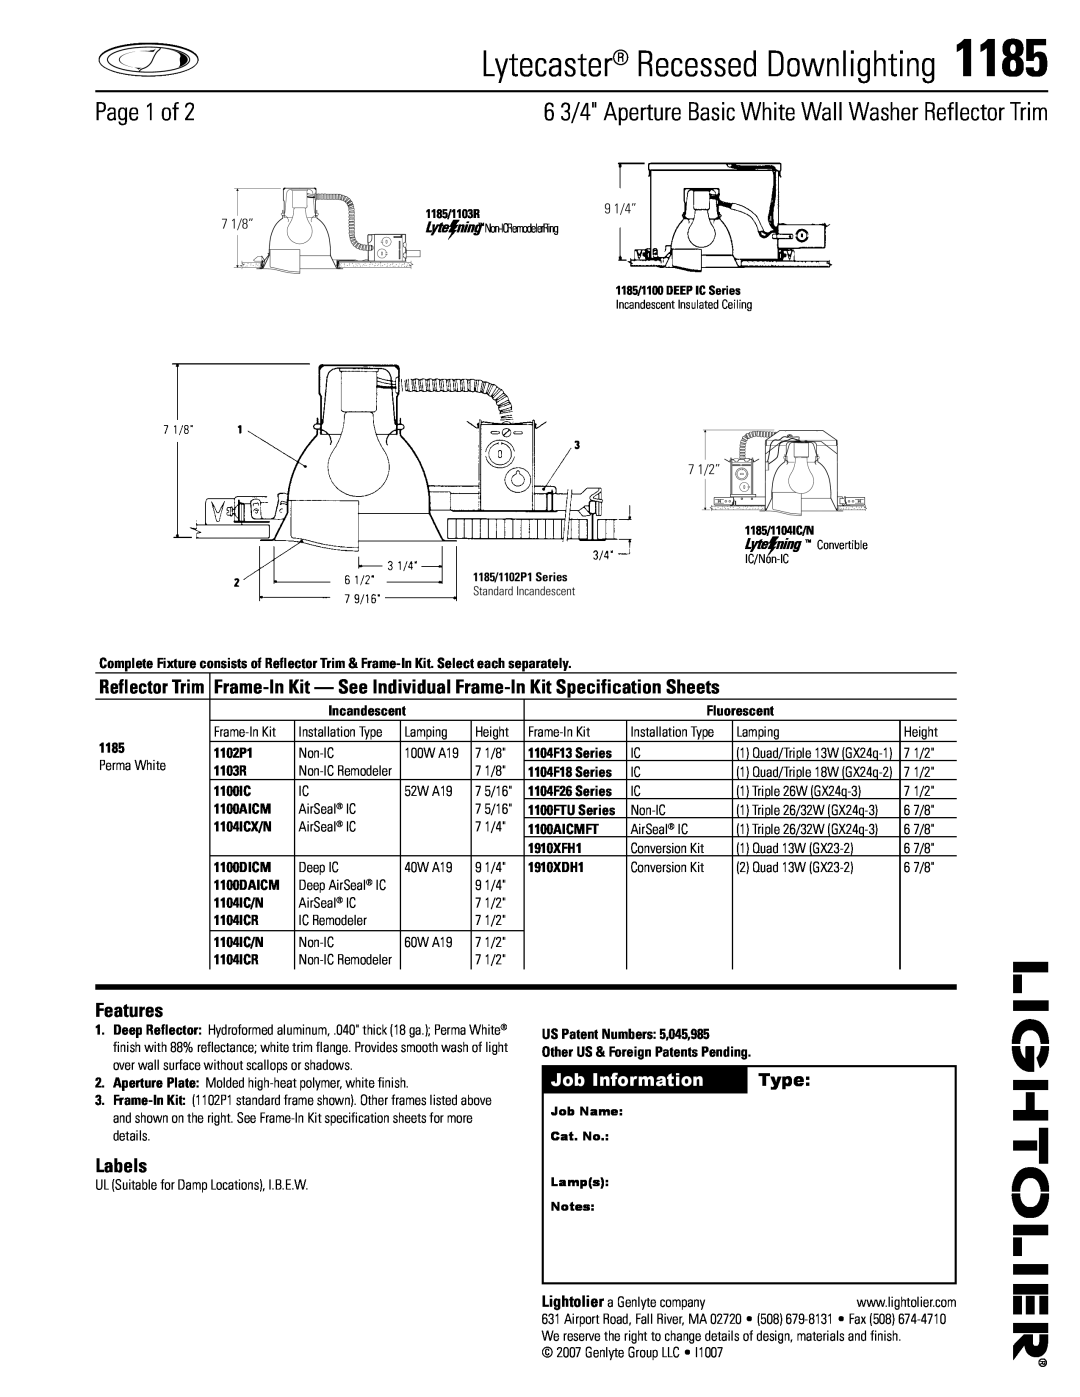 Lightolier 1185 specifications Lytecaster Recessed Downlighting, Page  of, Job Information, Type, Features, Labels 